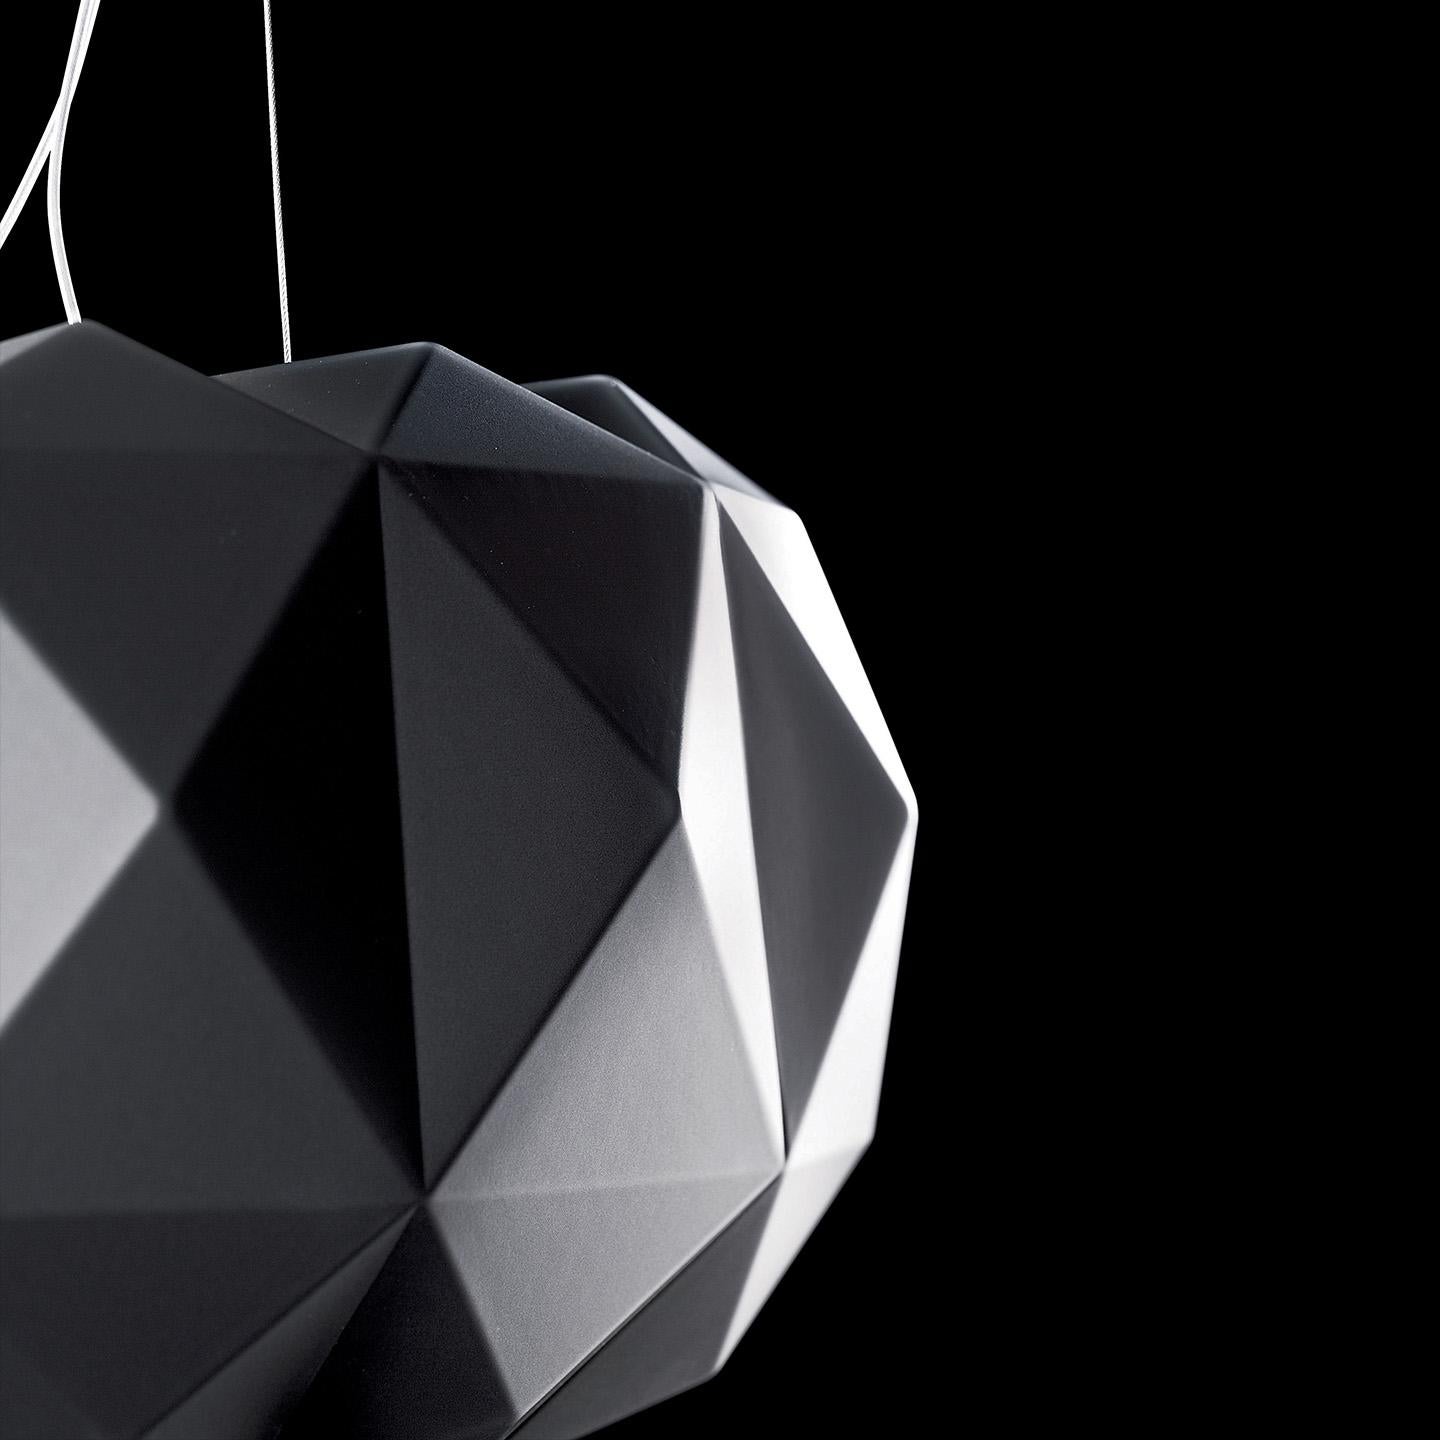 The Deluxe pendant, designed by Archirivolto, is a versatile and bold lighting collection featuring a geometrically-patterned, cloud-shaped hand blown glass diffuser. Its hand blown satin white or matte black diffuser is made of multiple layers of